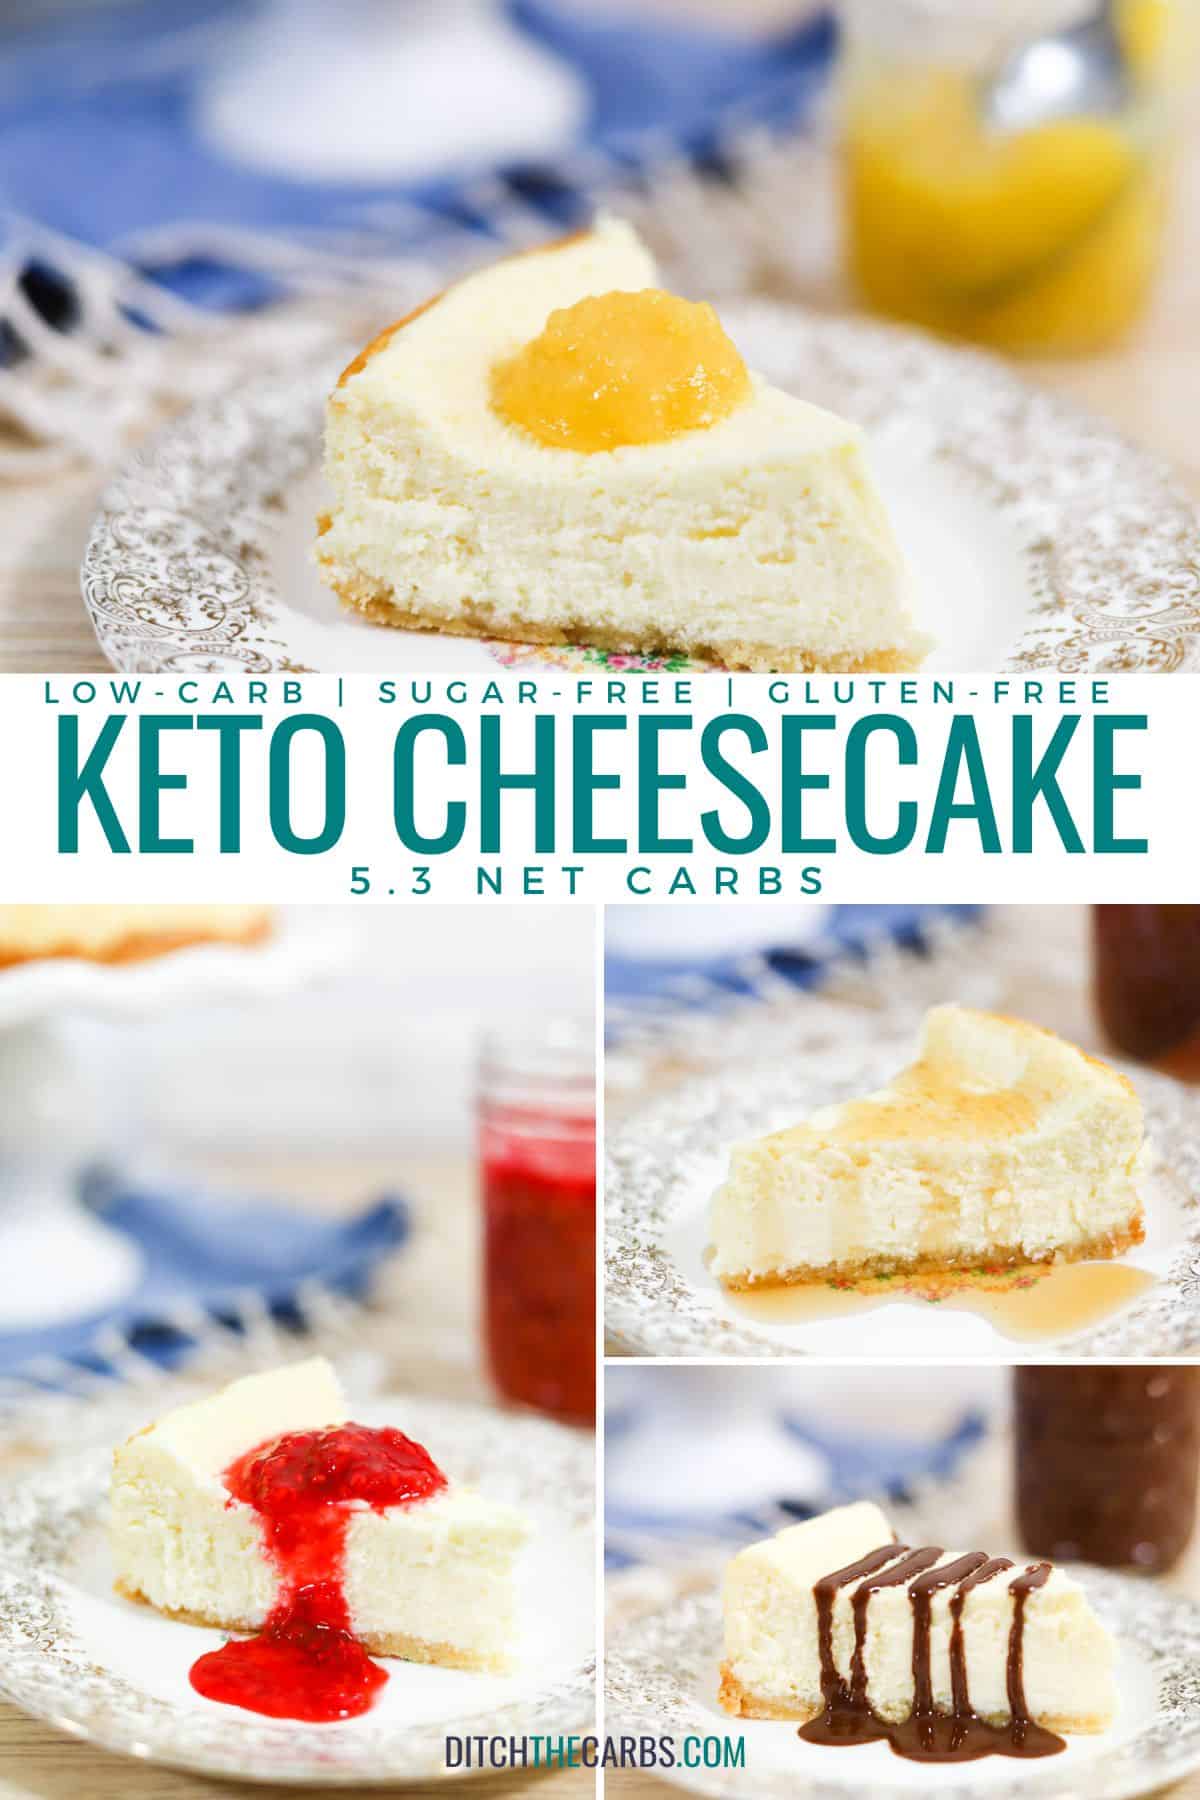 A collage of photos showing keto cheesecake slices with 4 toppings.